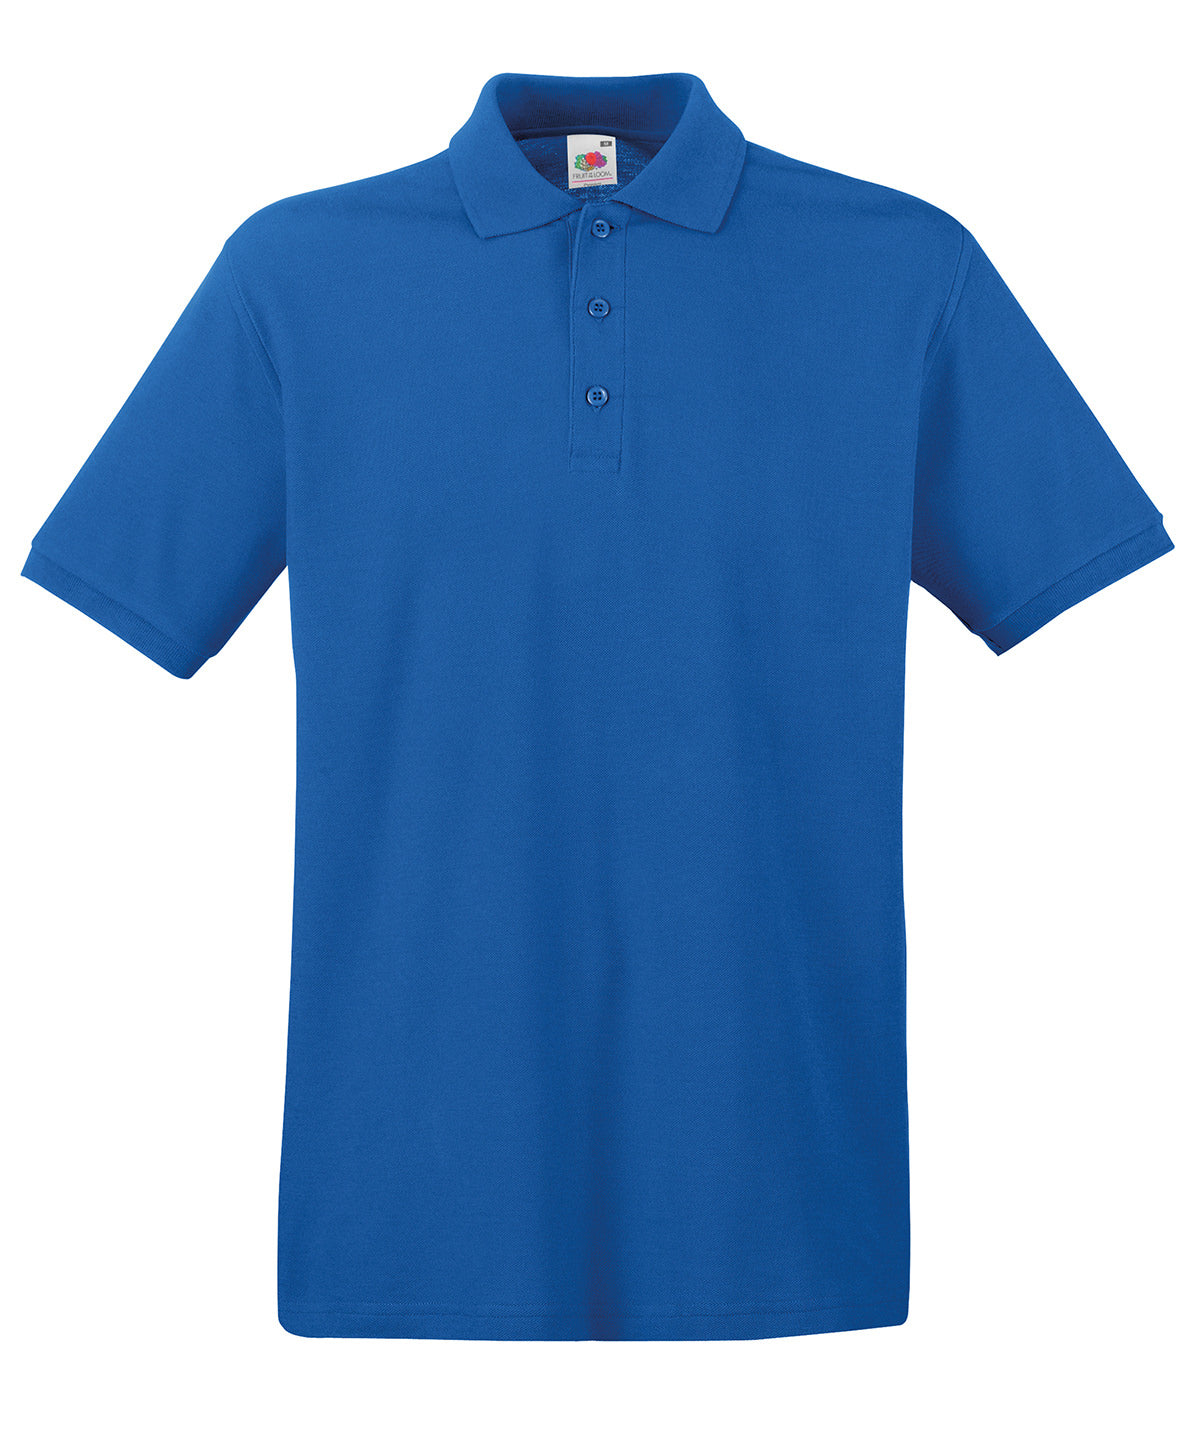 Personalised Polo Shirts - Black Fruit of the Loom Premium polo